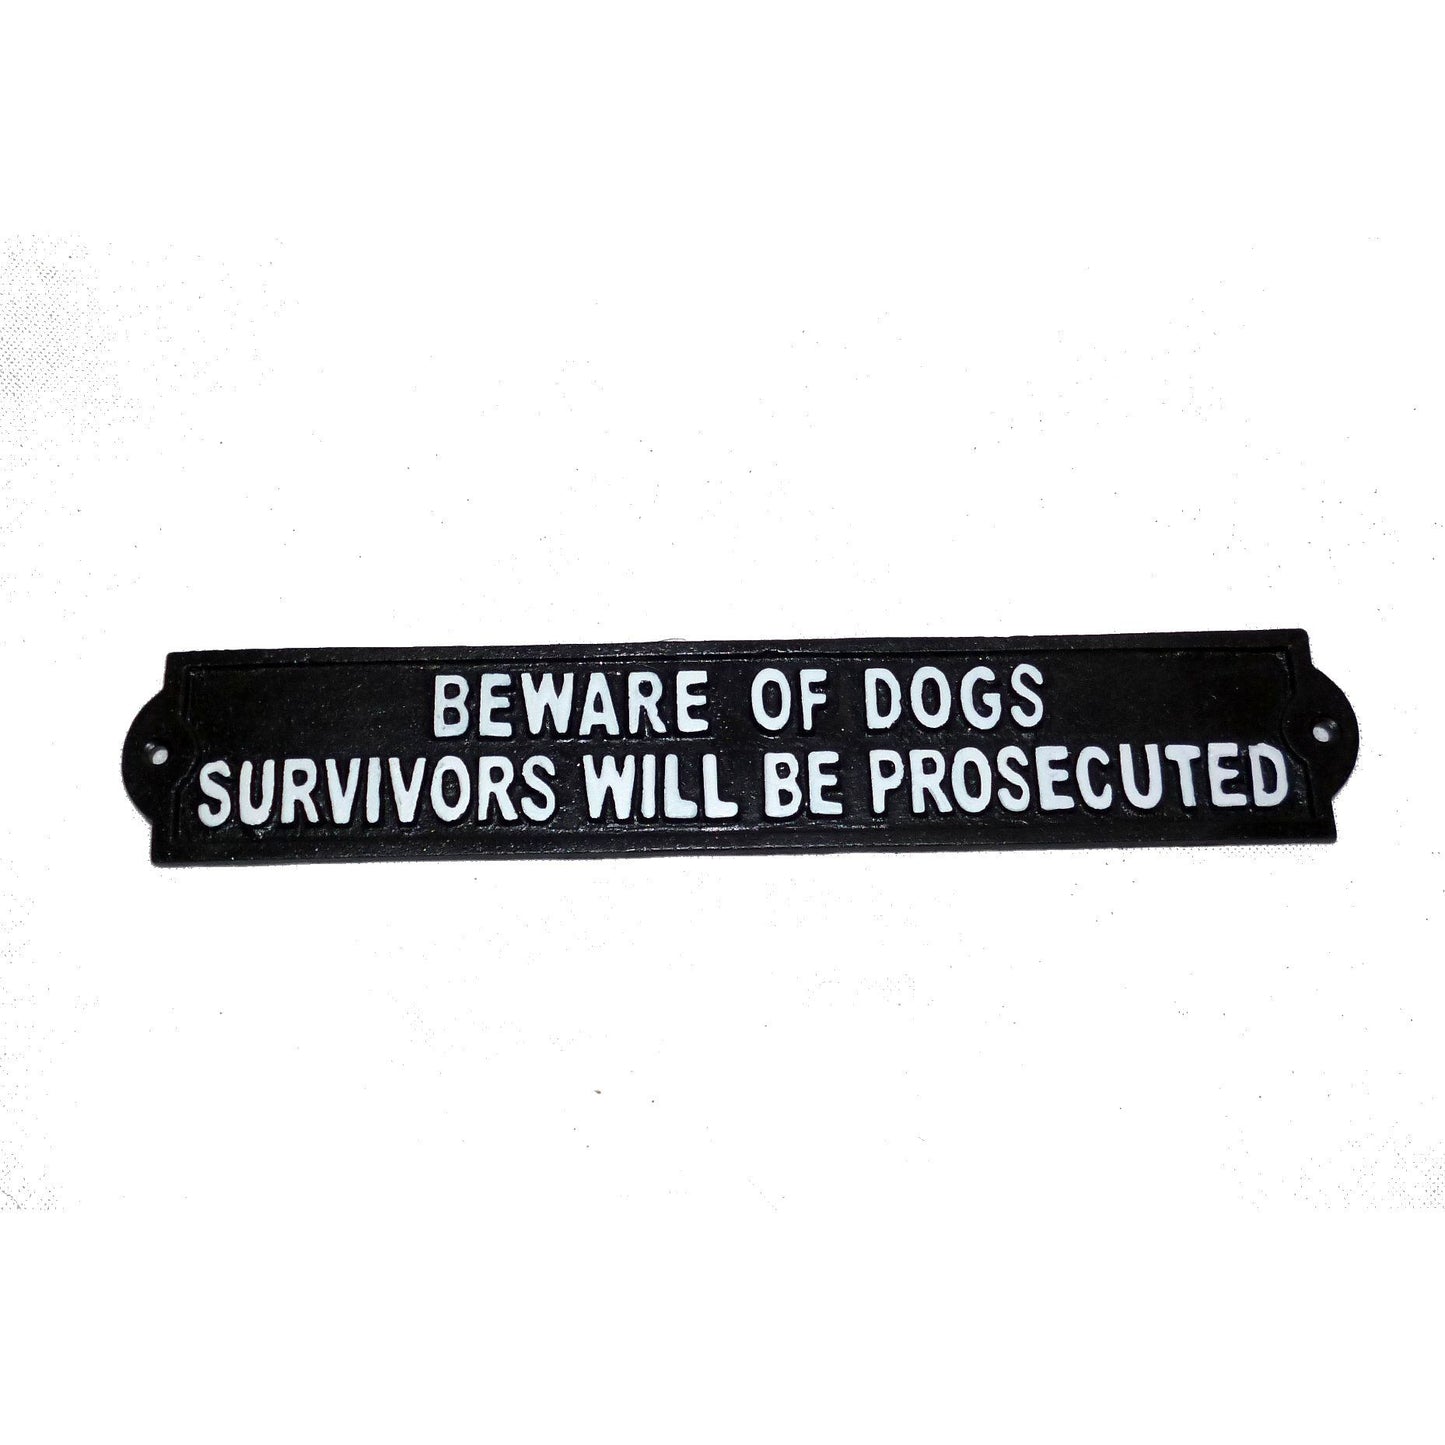 Beware of Dogs - Survivors Prosecuted Cast Iron Sign